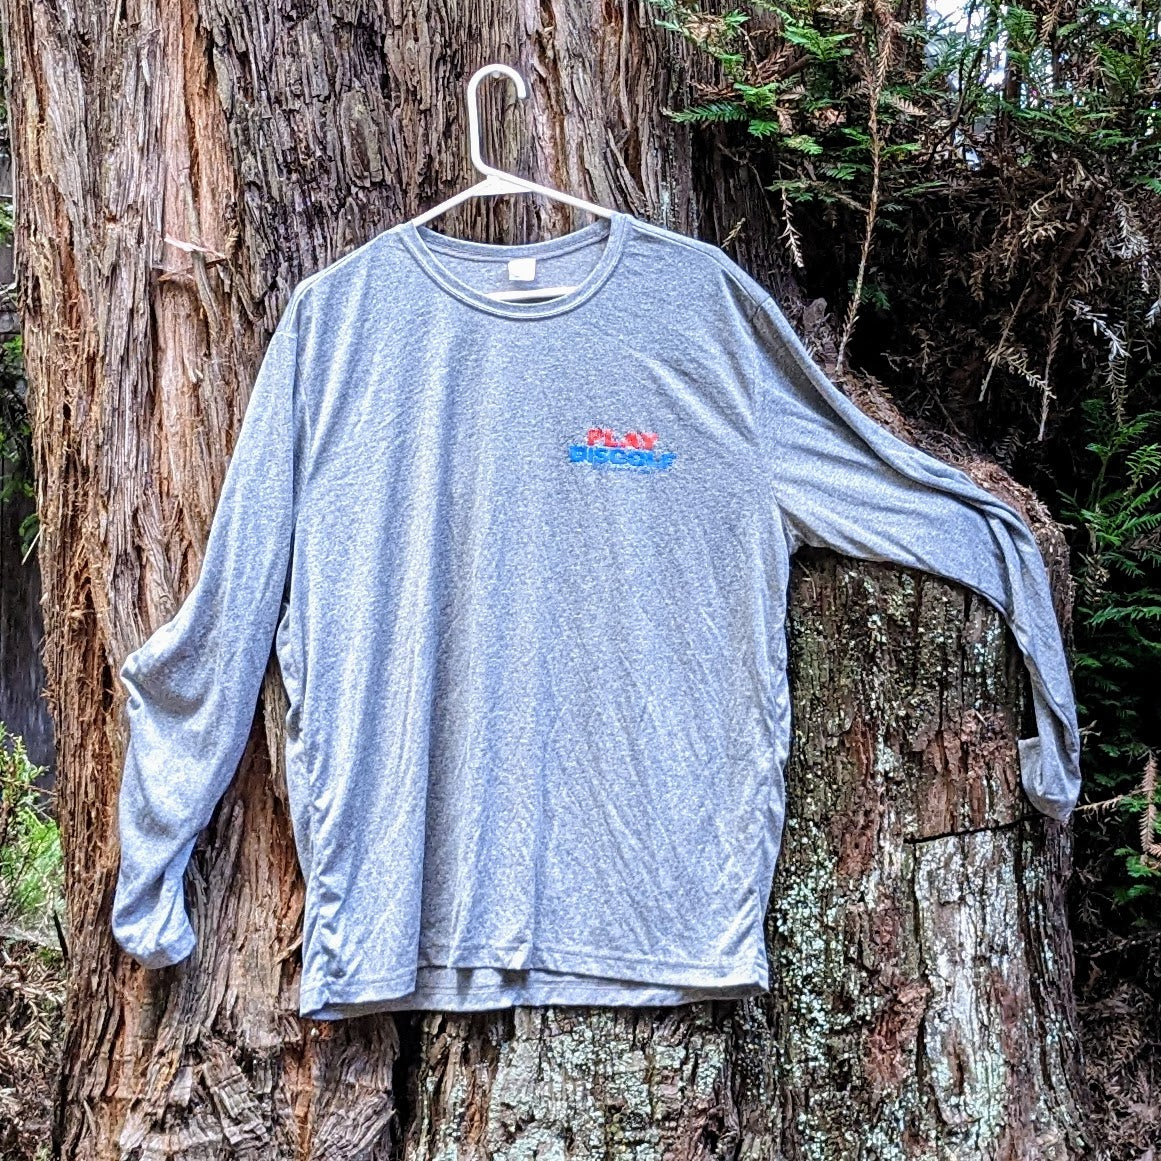 Clearance- Gray Long Sleeve with the Play DiscGolf logo front and Languages Grid version of logo on back, Size XL